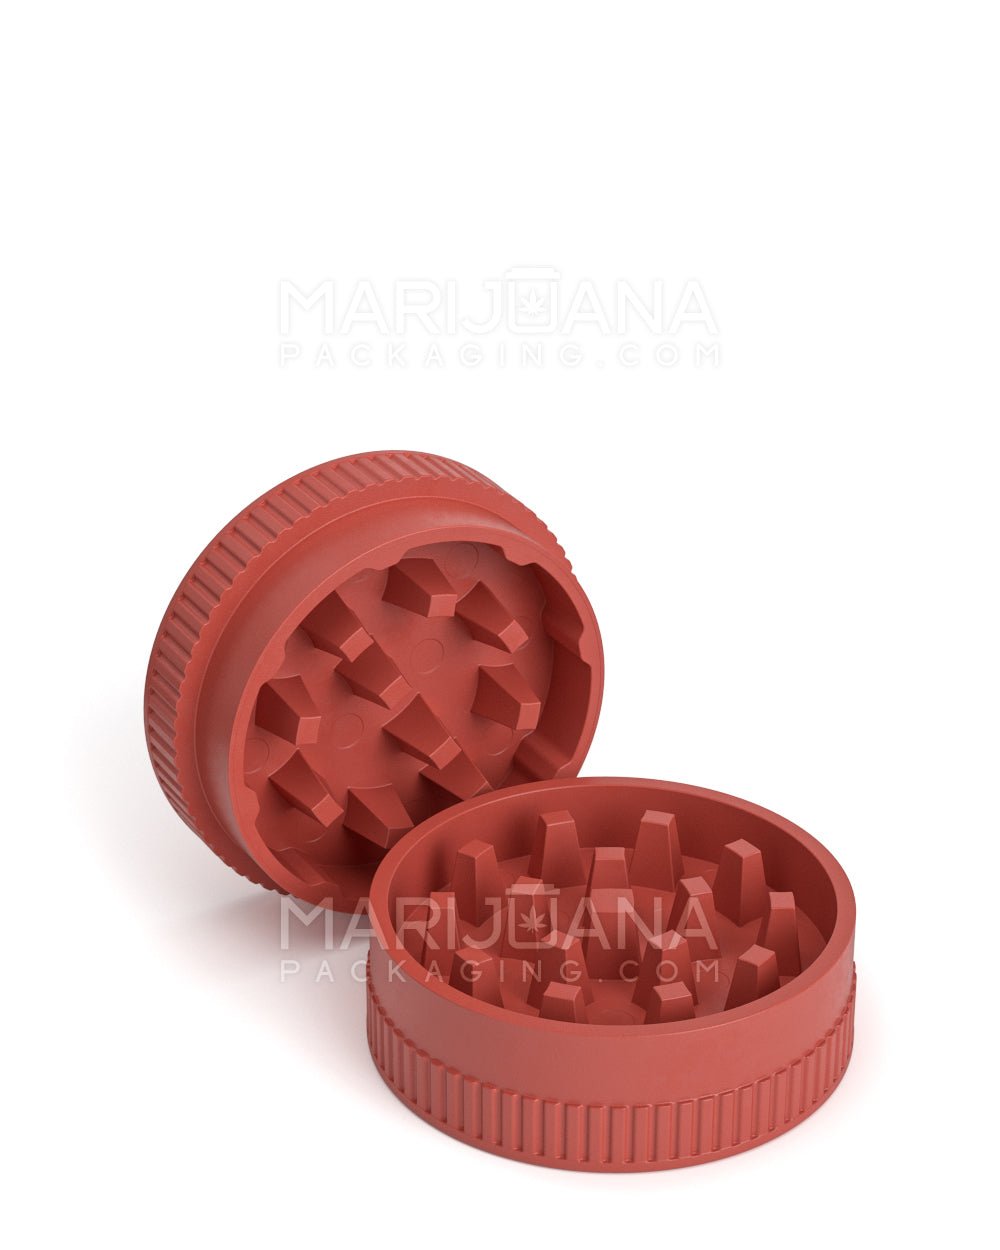 Biodegradable Thick Wall Red Grinder | 2 Piece - 55mm - 12 Count - 6